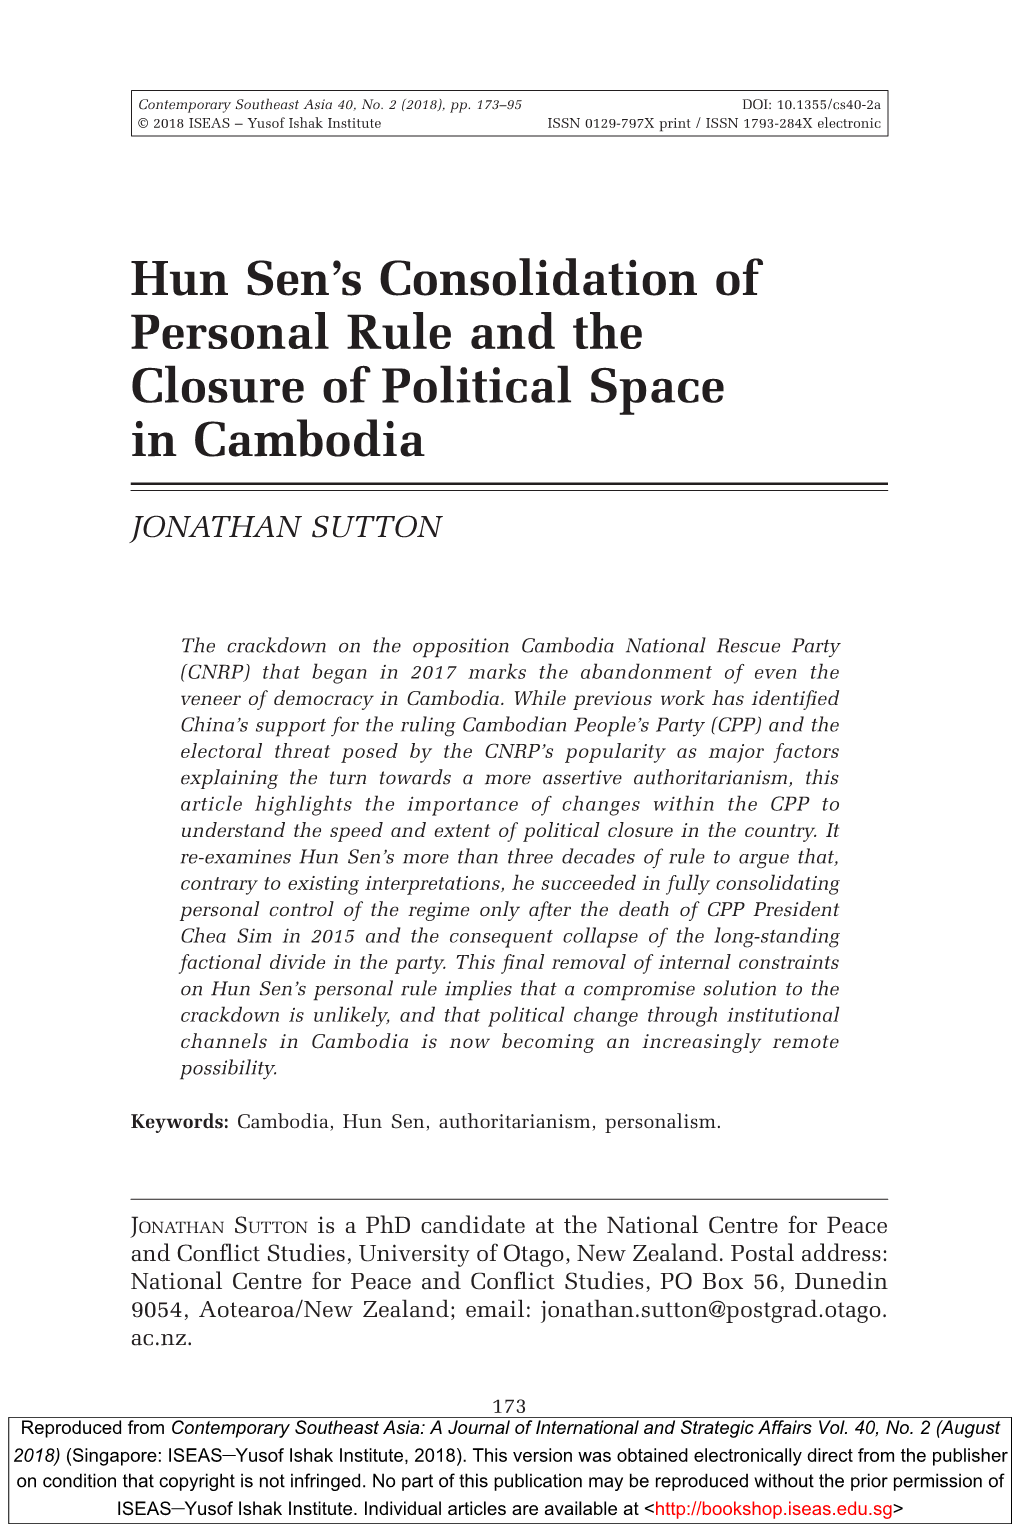 Hun Sen's Consolidation of Personal Rule and the Closure of Political Space in Cambodia